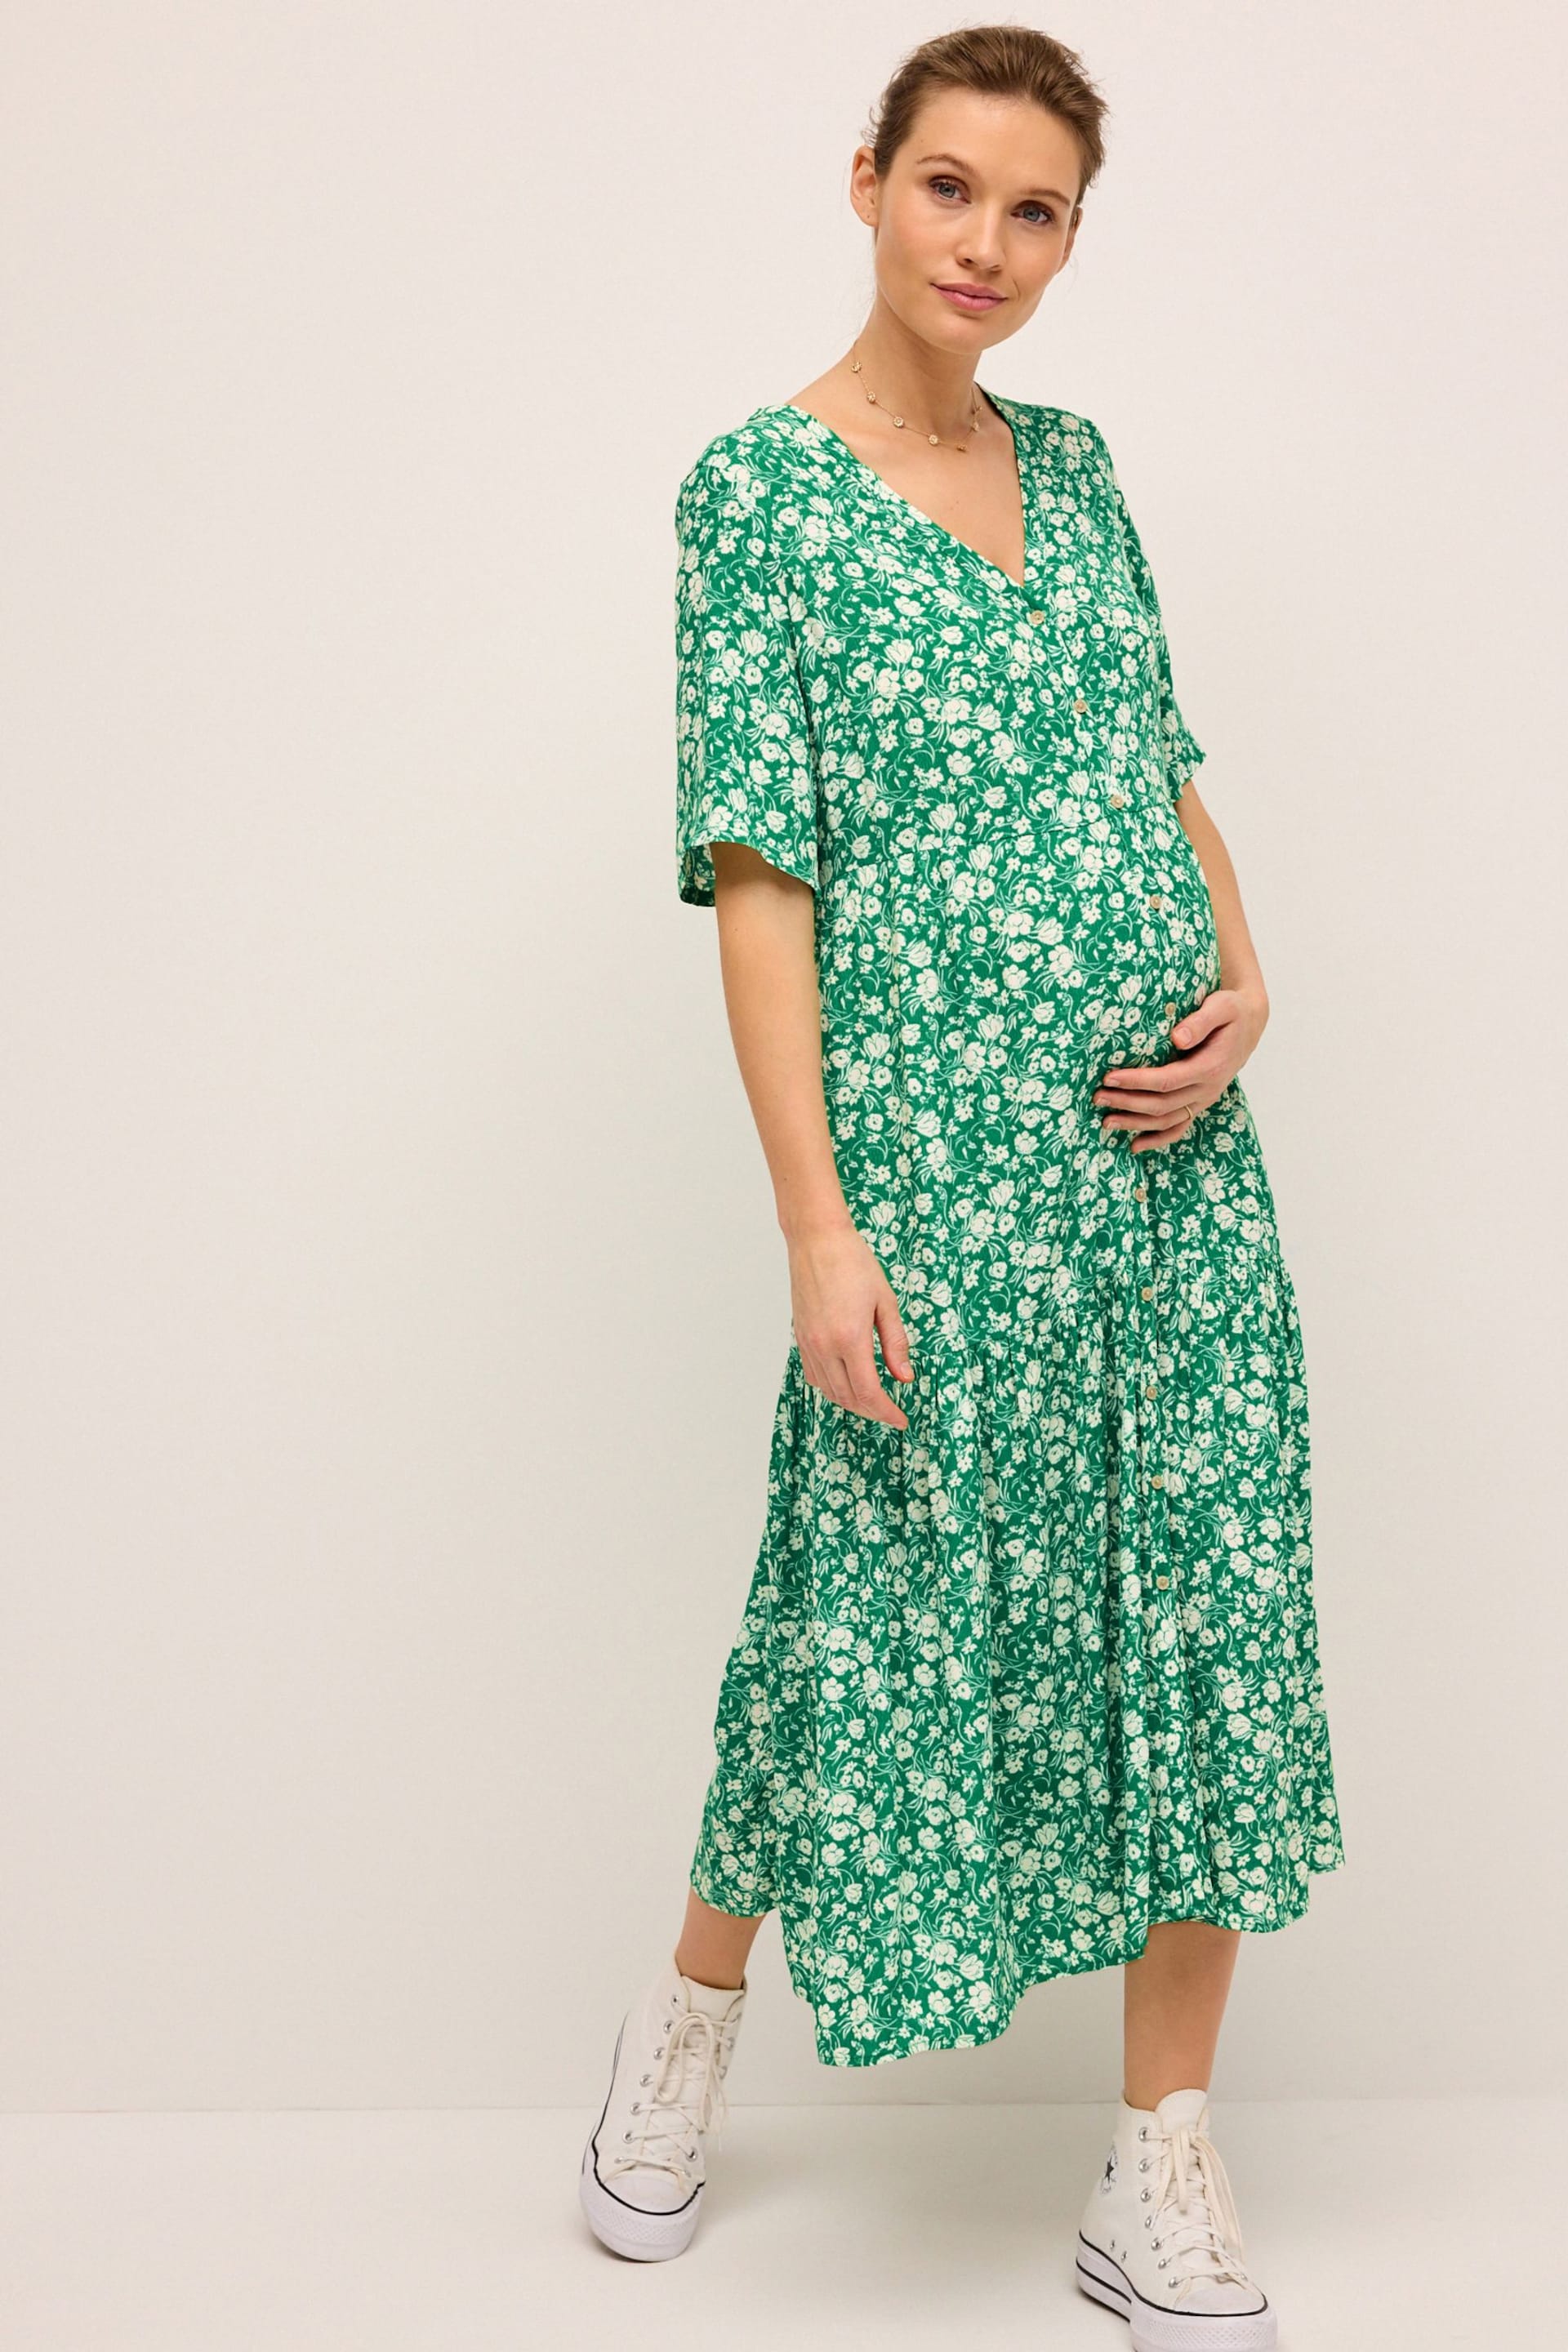 Green Floral Maternity Angel Sleeve Dress - Image 1 of 8